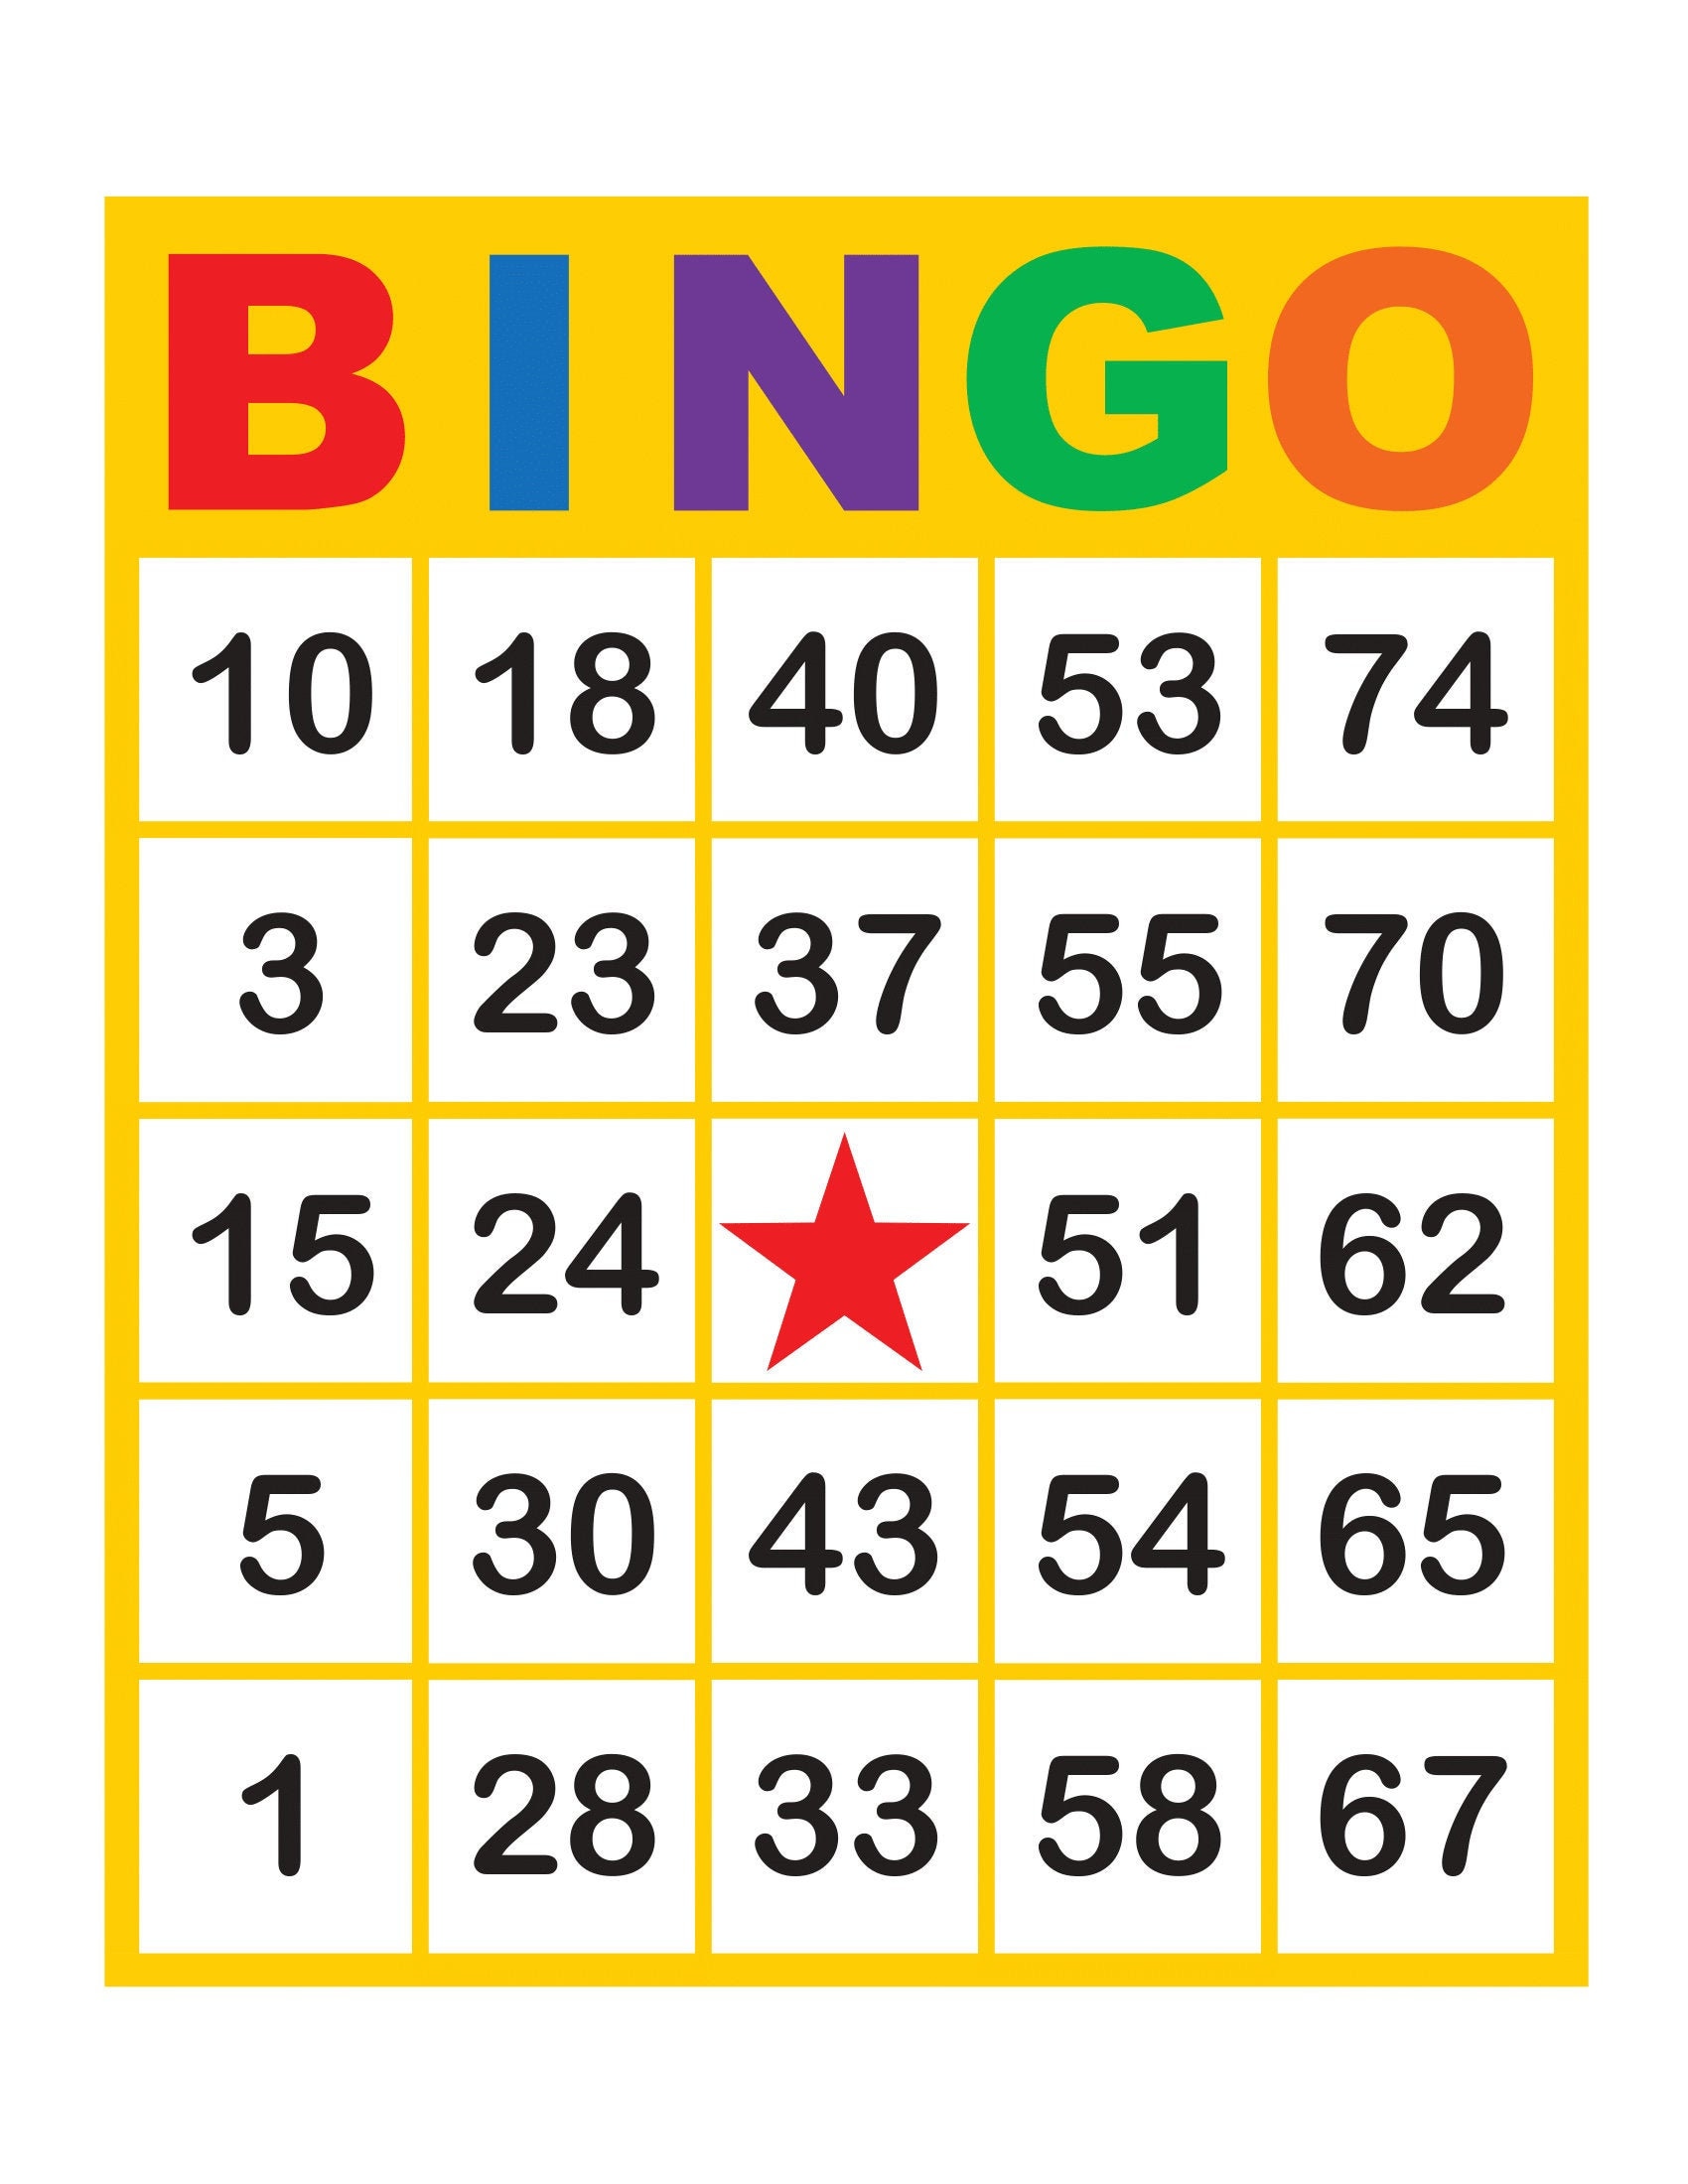 bingo-cards-1000-cards-1-per-page-immediate-pdf-download-etsy